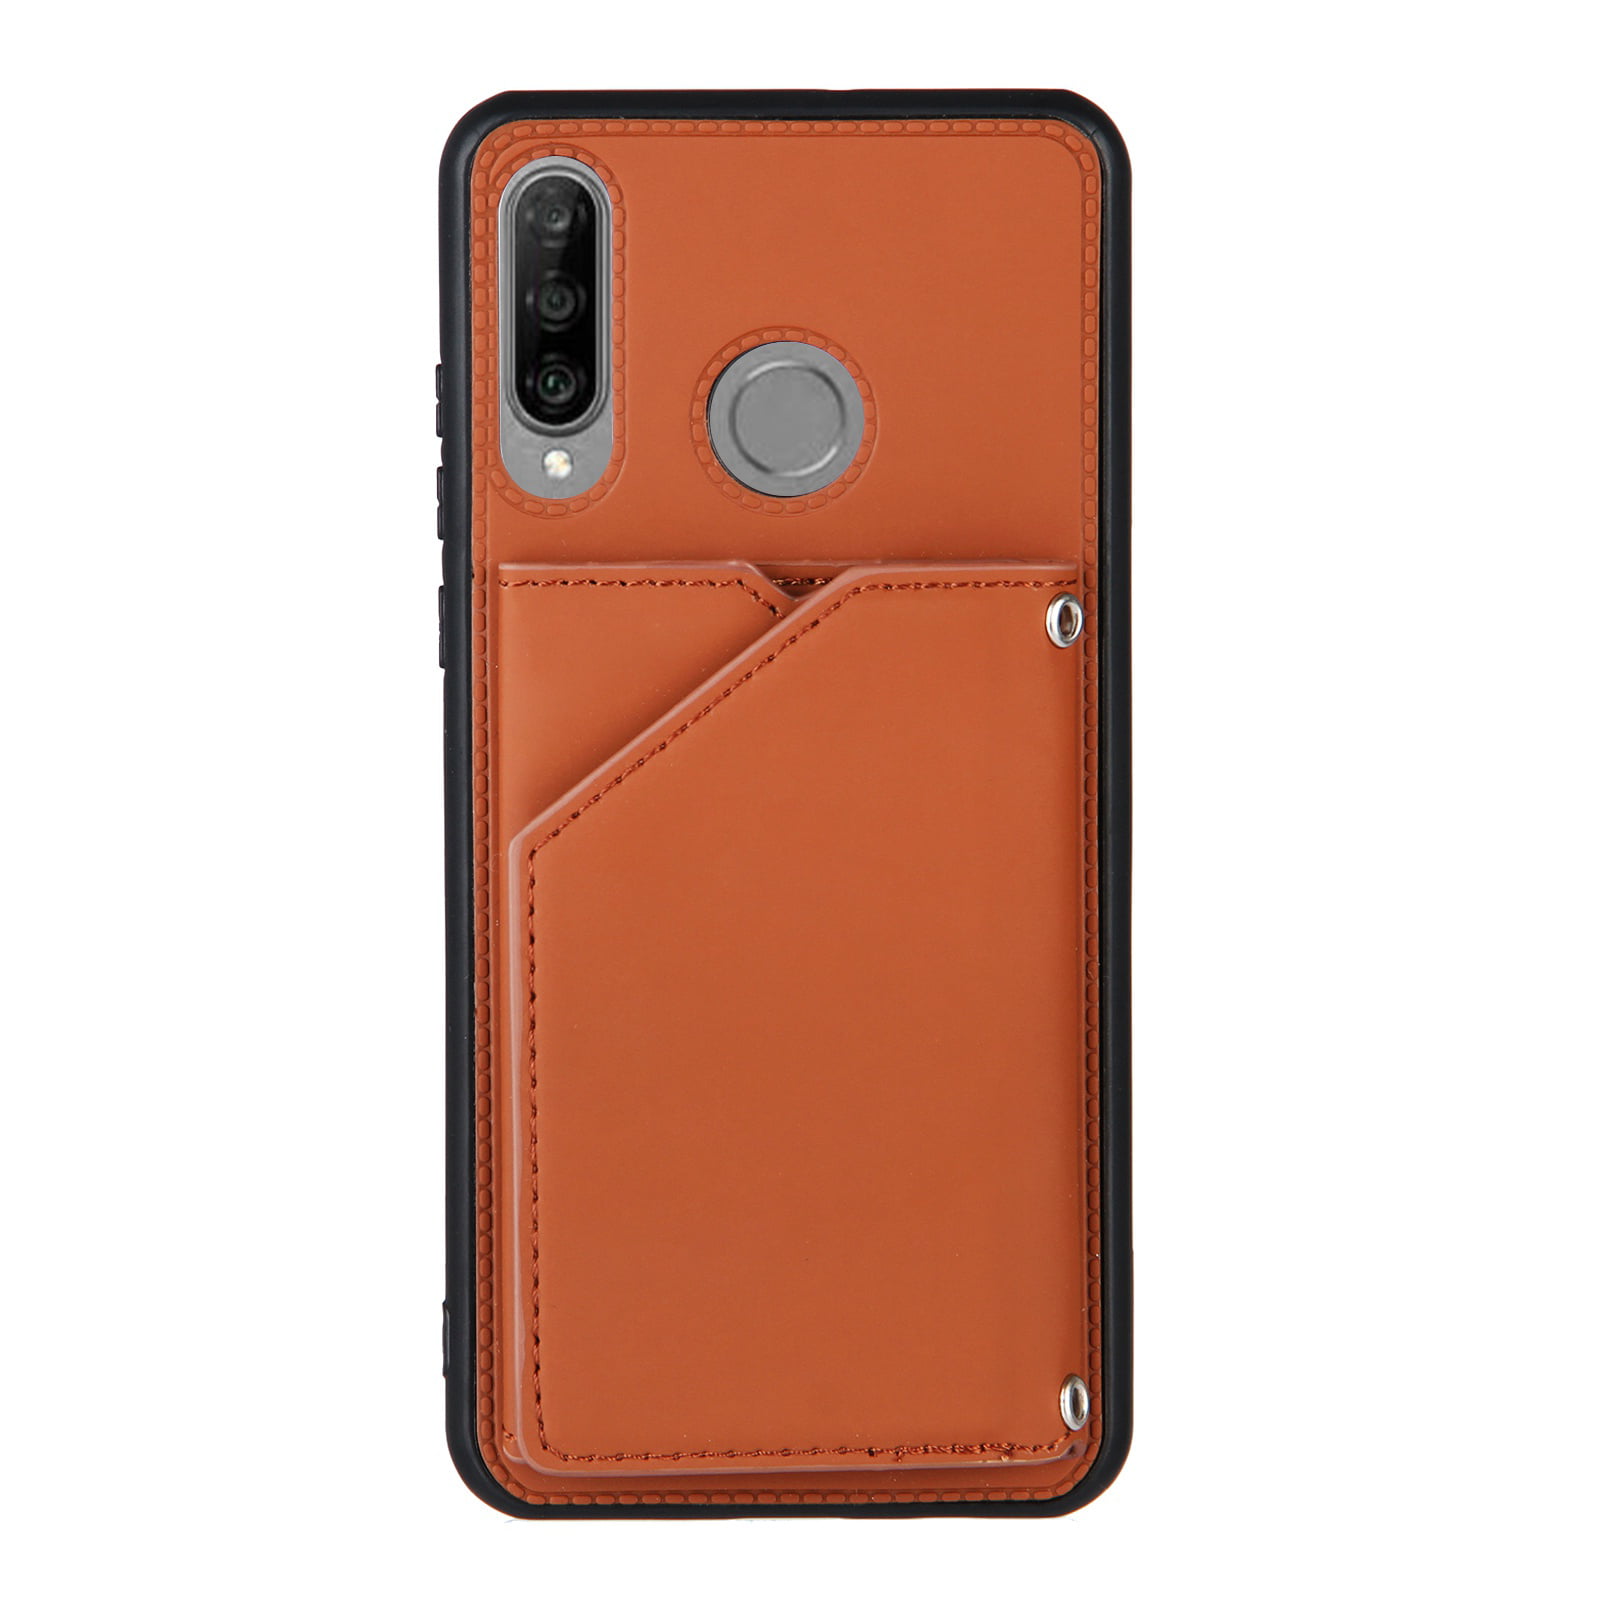 Huawei P30 lite Flip Case Cover for Leather Card Holders Kickstand Mobile Phone Cover Extra-Protective Business Flip Cover 